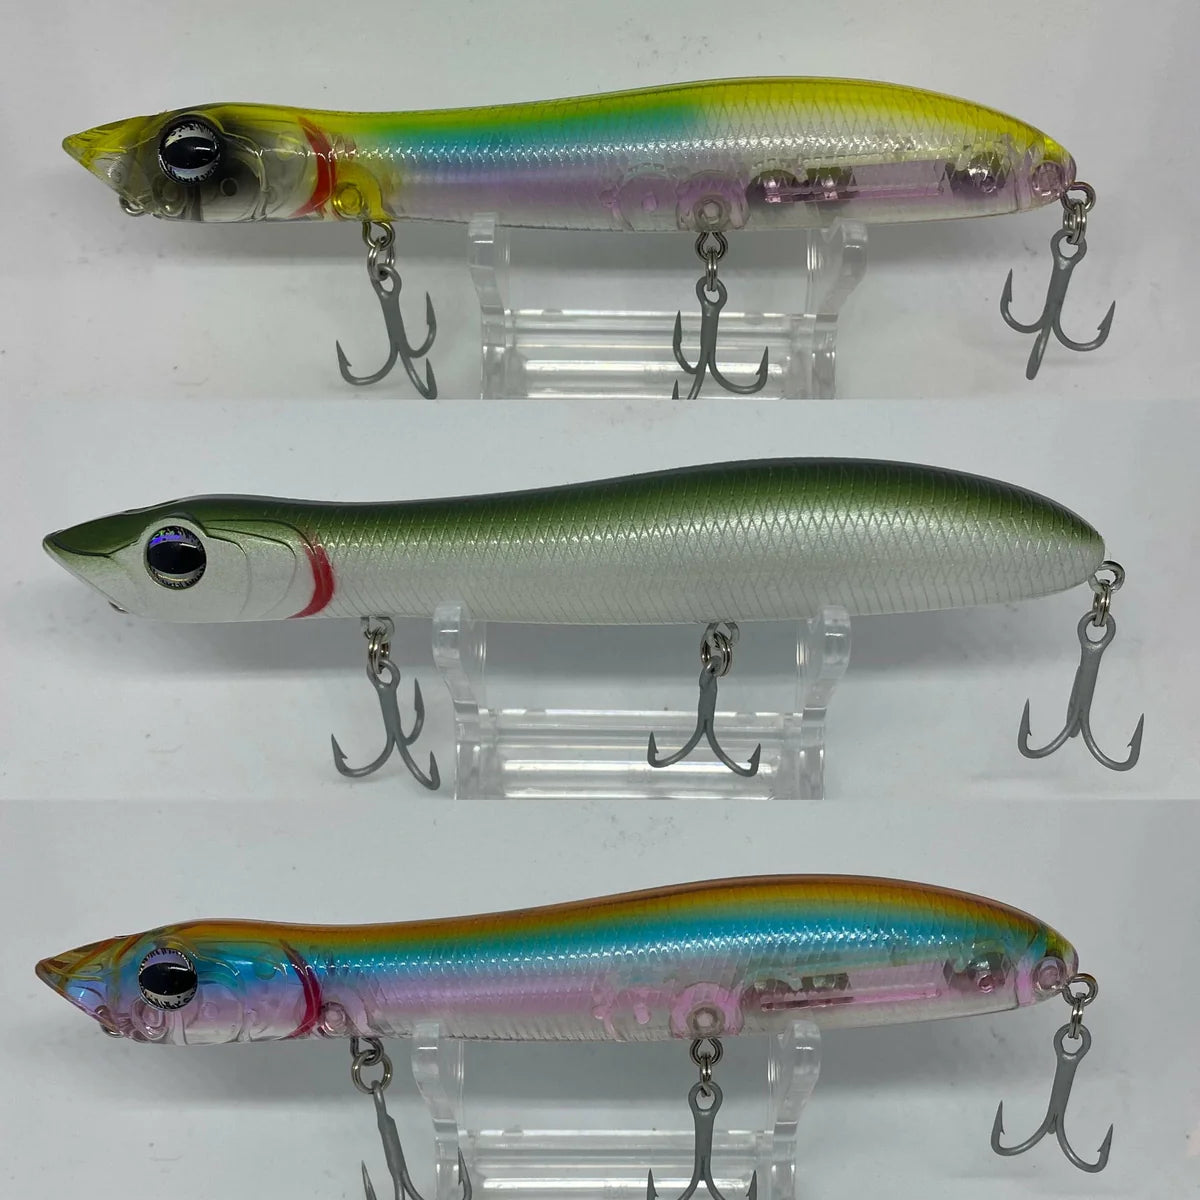 Multi-Buy Products for Bass Lure Fishing